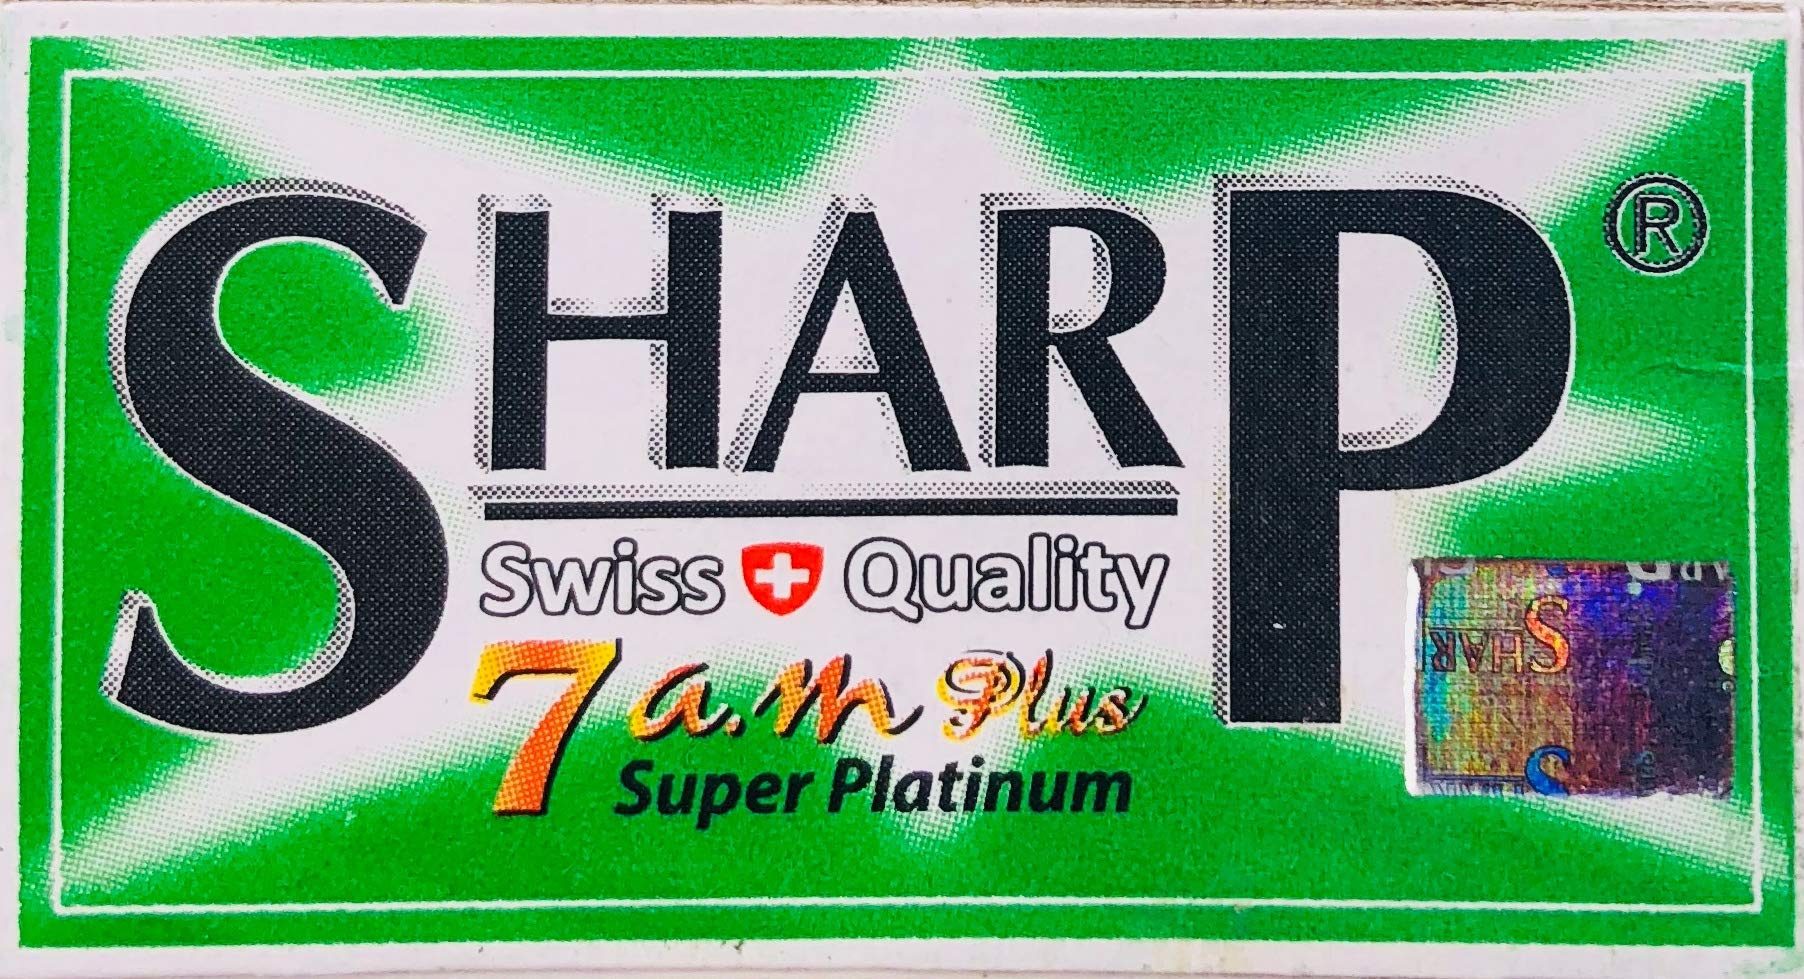 100 Sharp 7AM Super Platinum Double Edge Razor Blades For Safety Razor - Men´s Safety Razor Blades For Shaving For Men For A Smooth And Clean Shave (1 Year Supply)